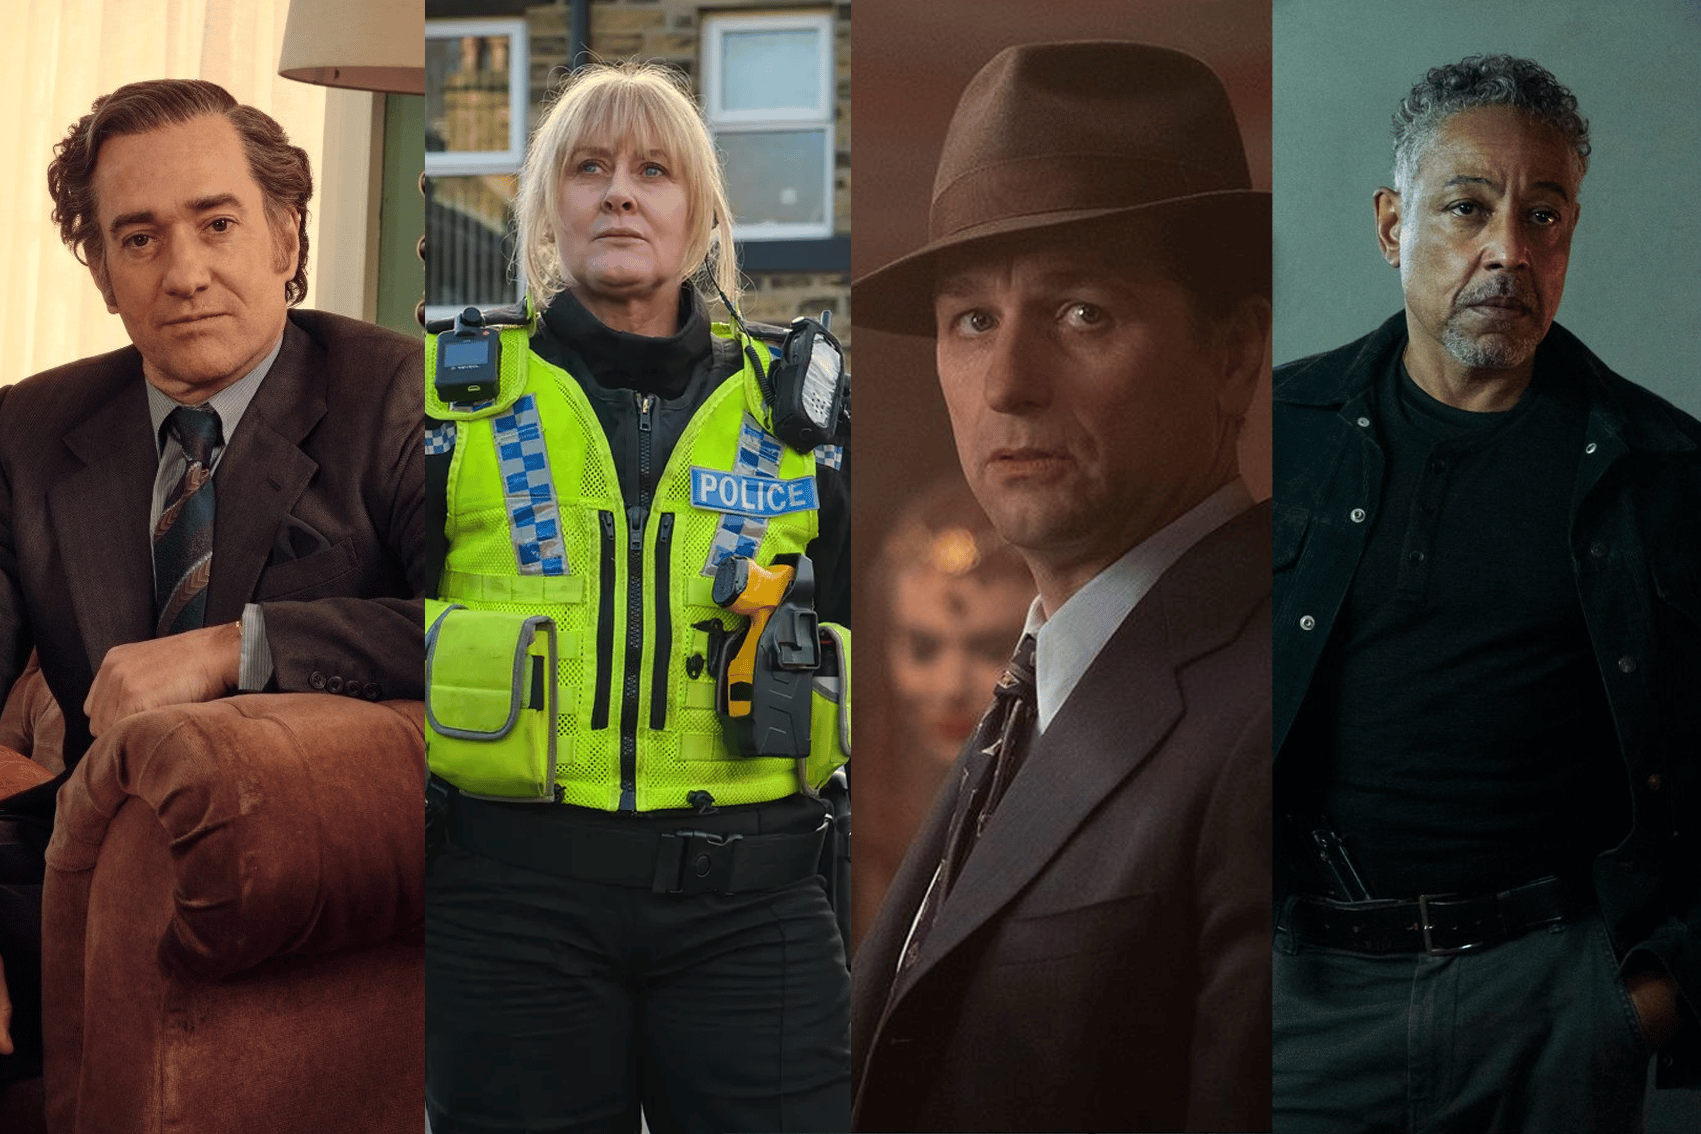 The Gold on BBC is your new must-watch true crime drama